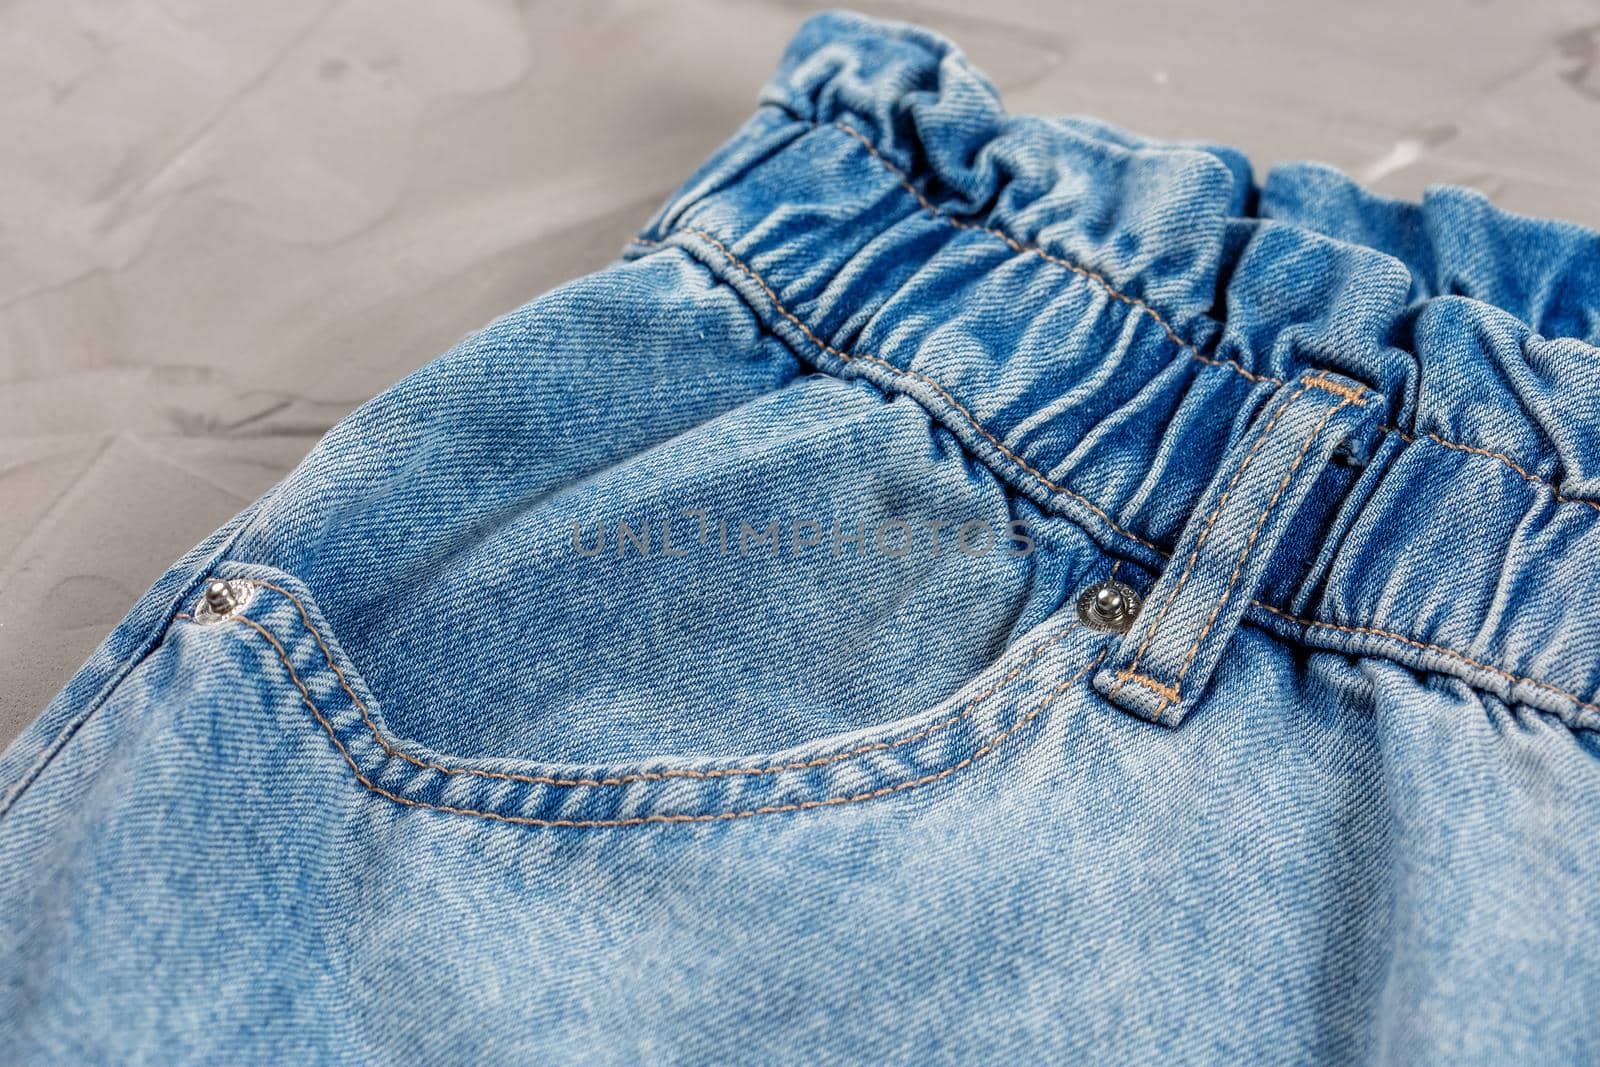 Close-up of blue jeans pocket showing fabric texture and stitching.